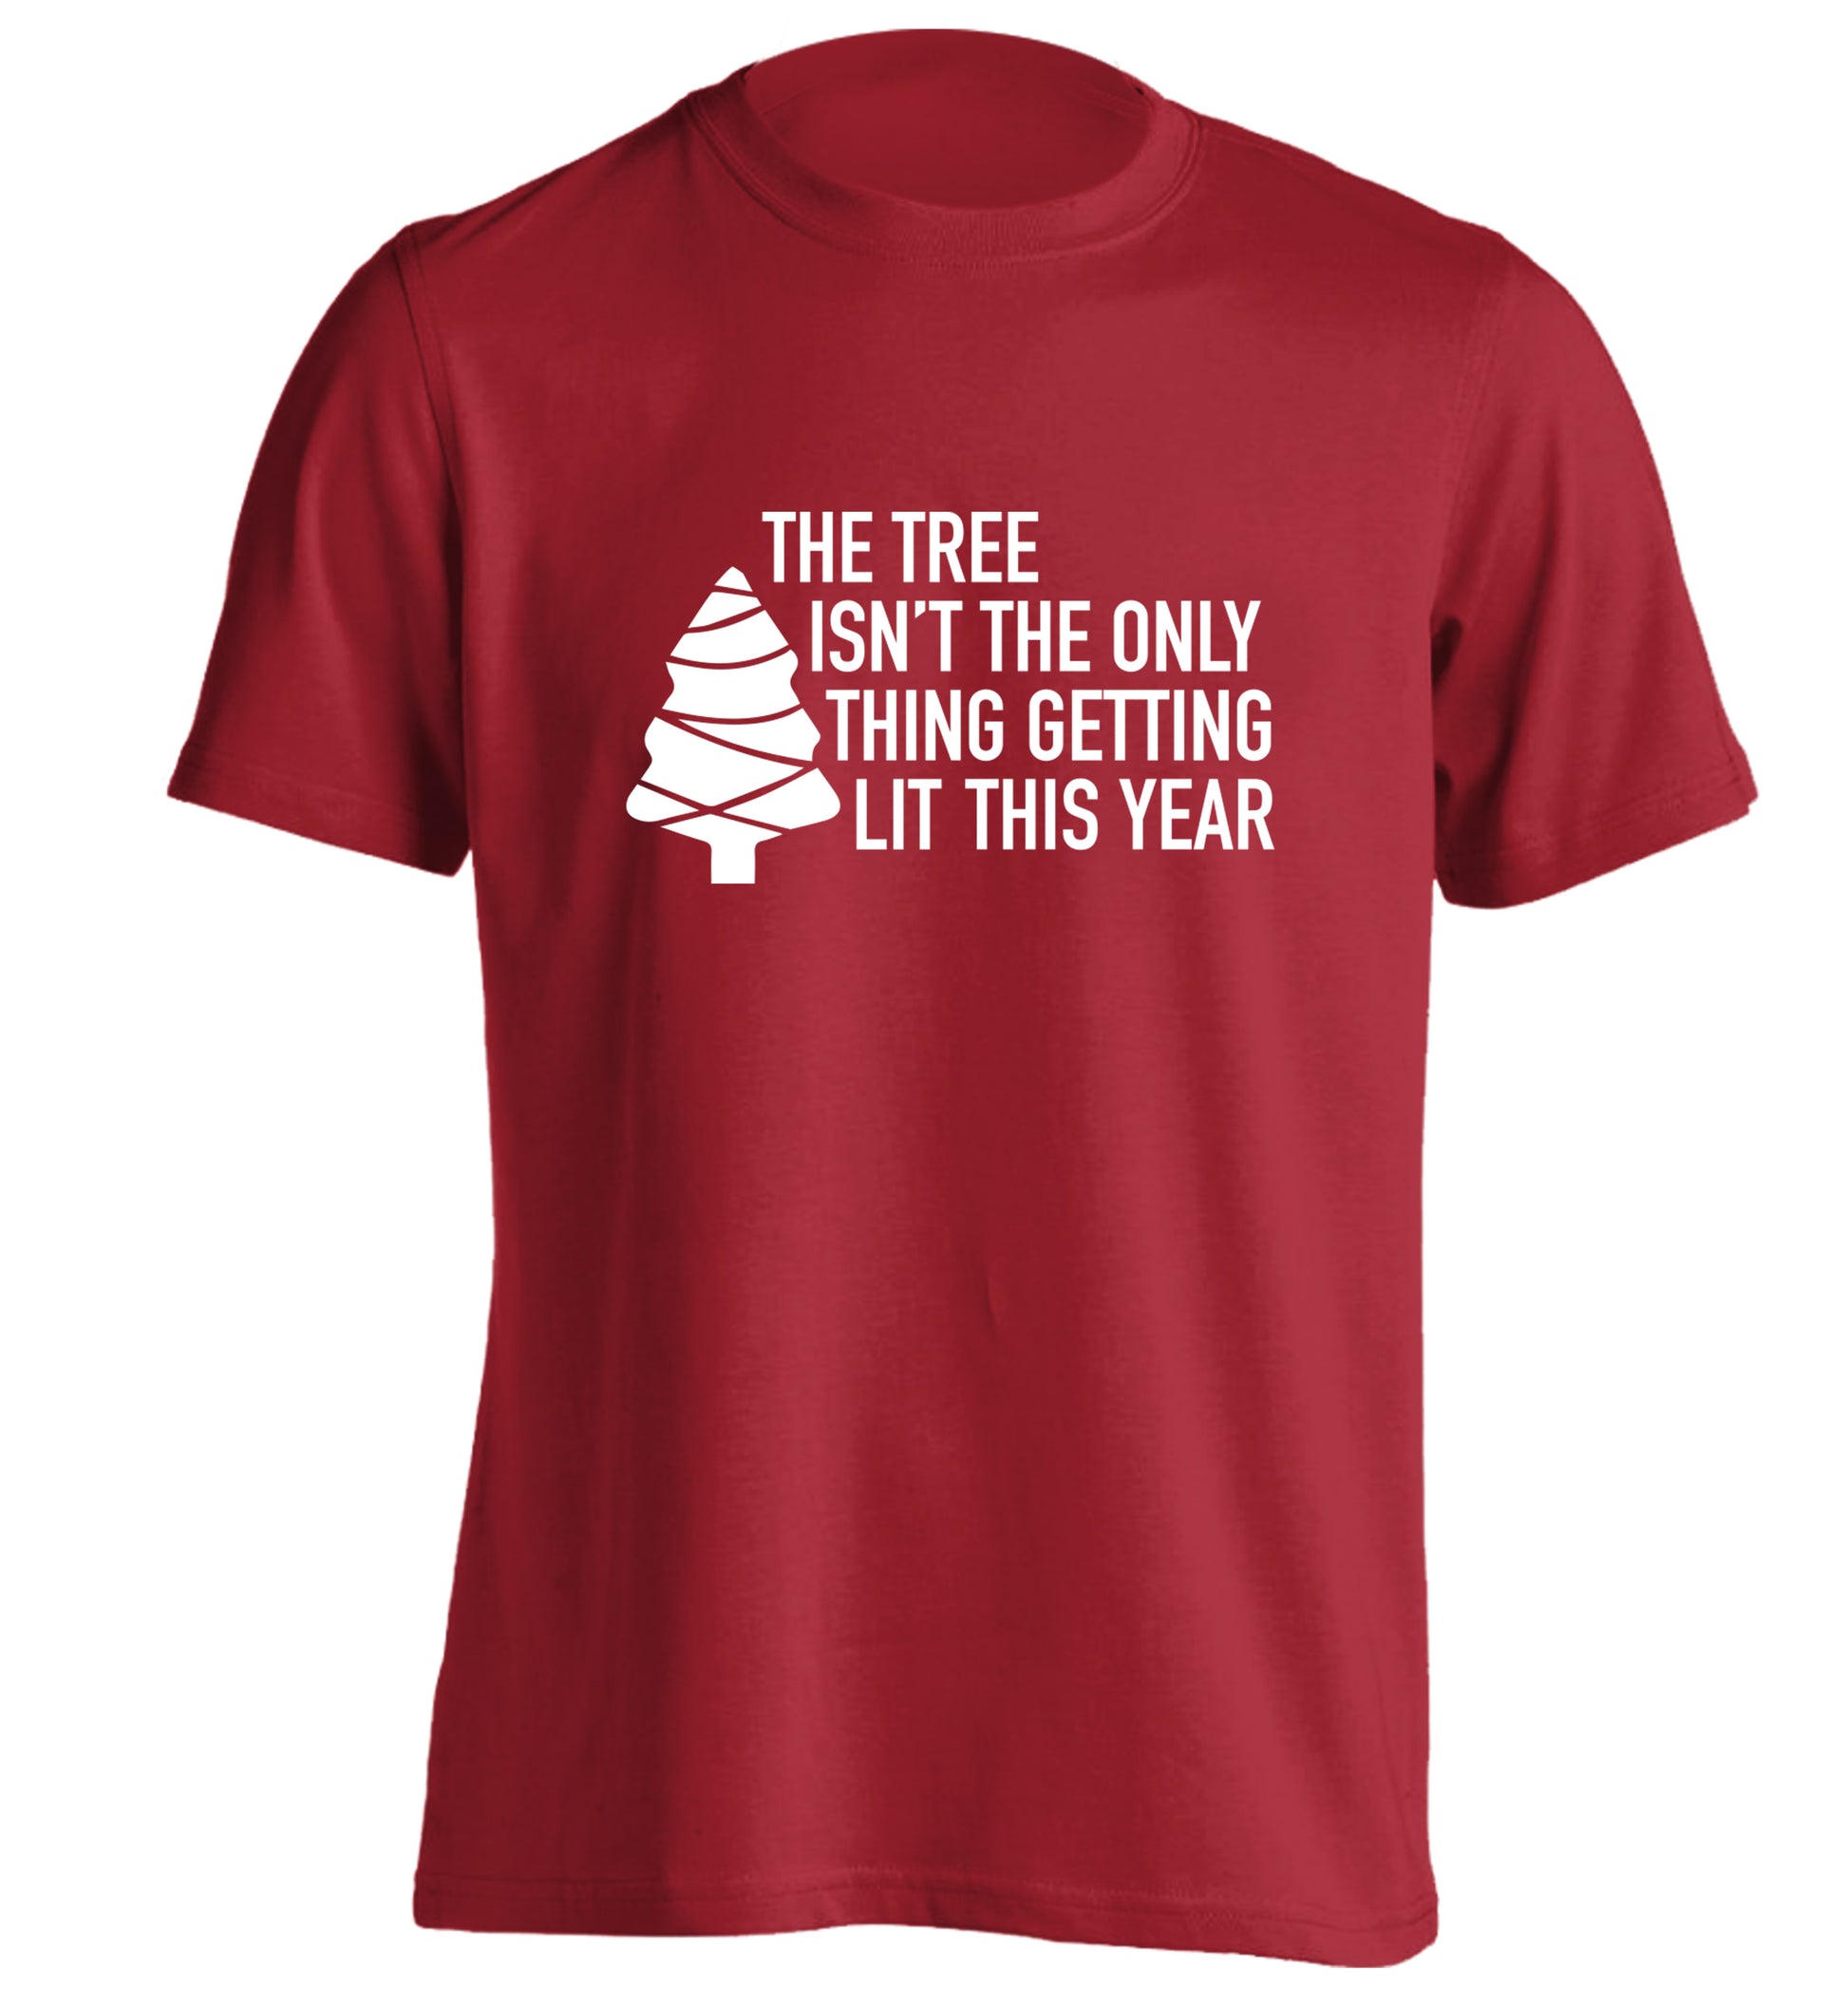 The tree isn't the only thing getting lit this year adults unisex red Tshirt 2XL